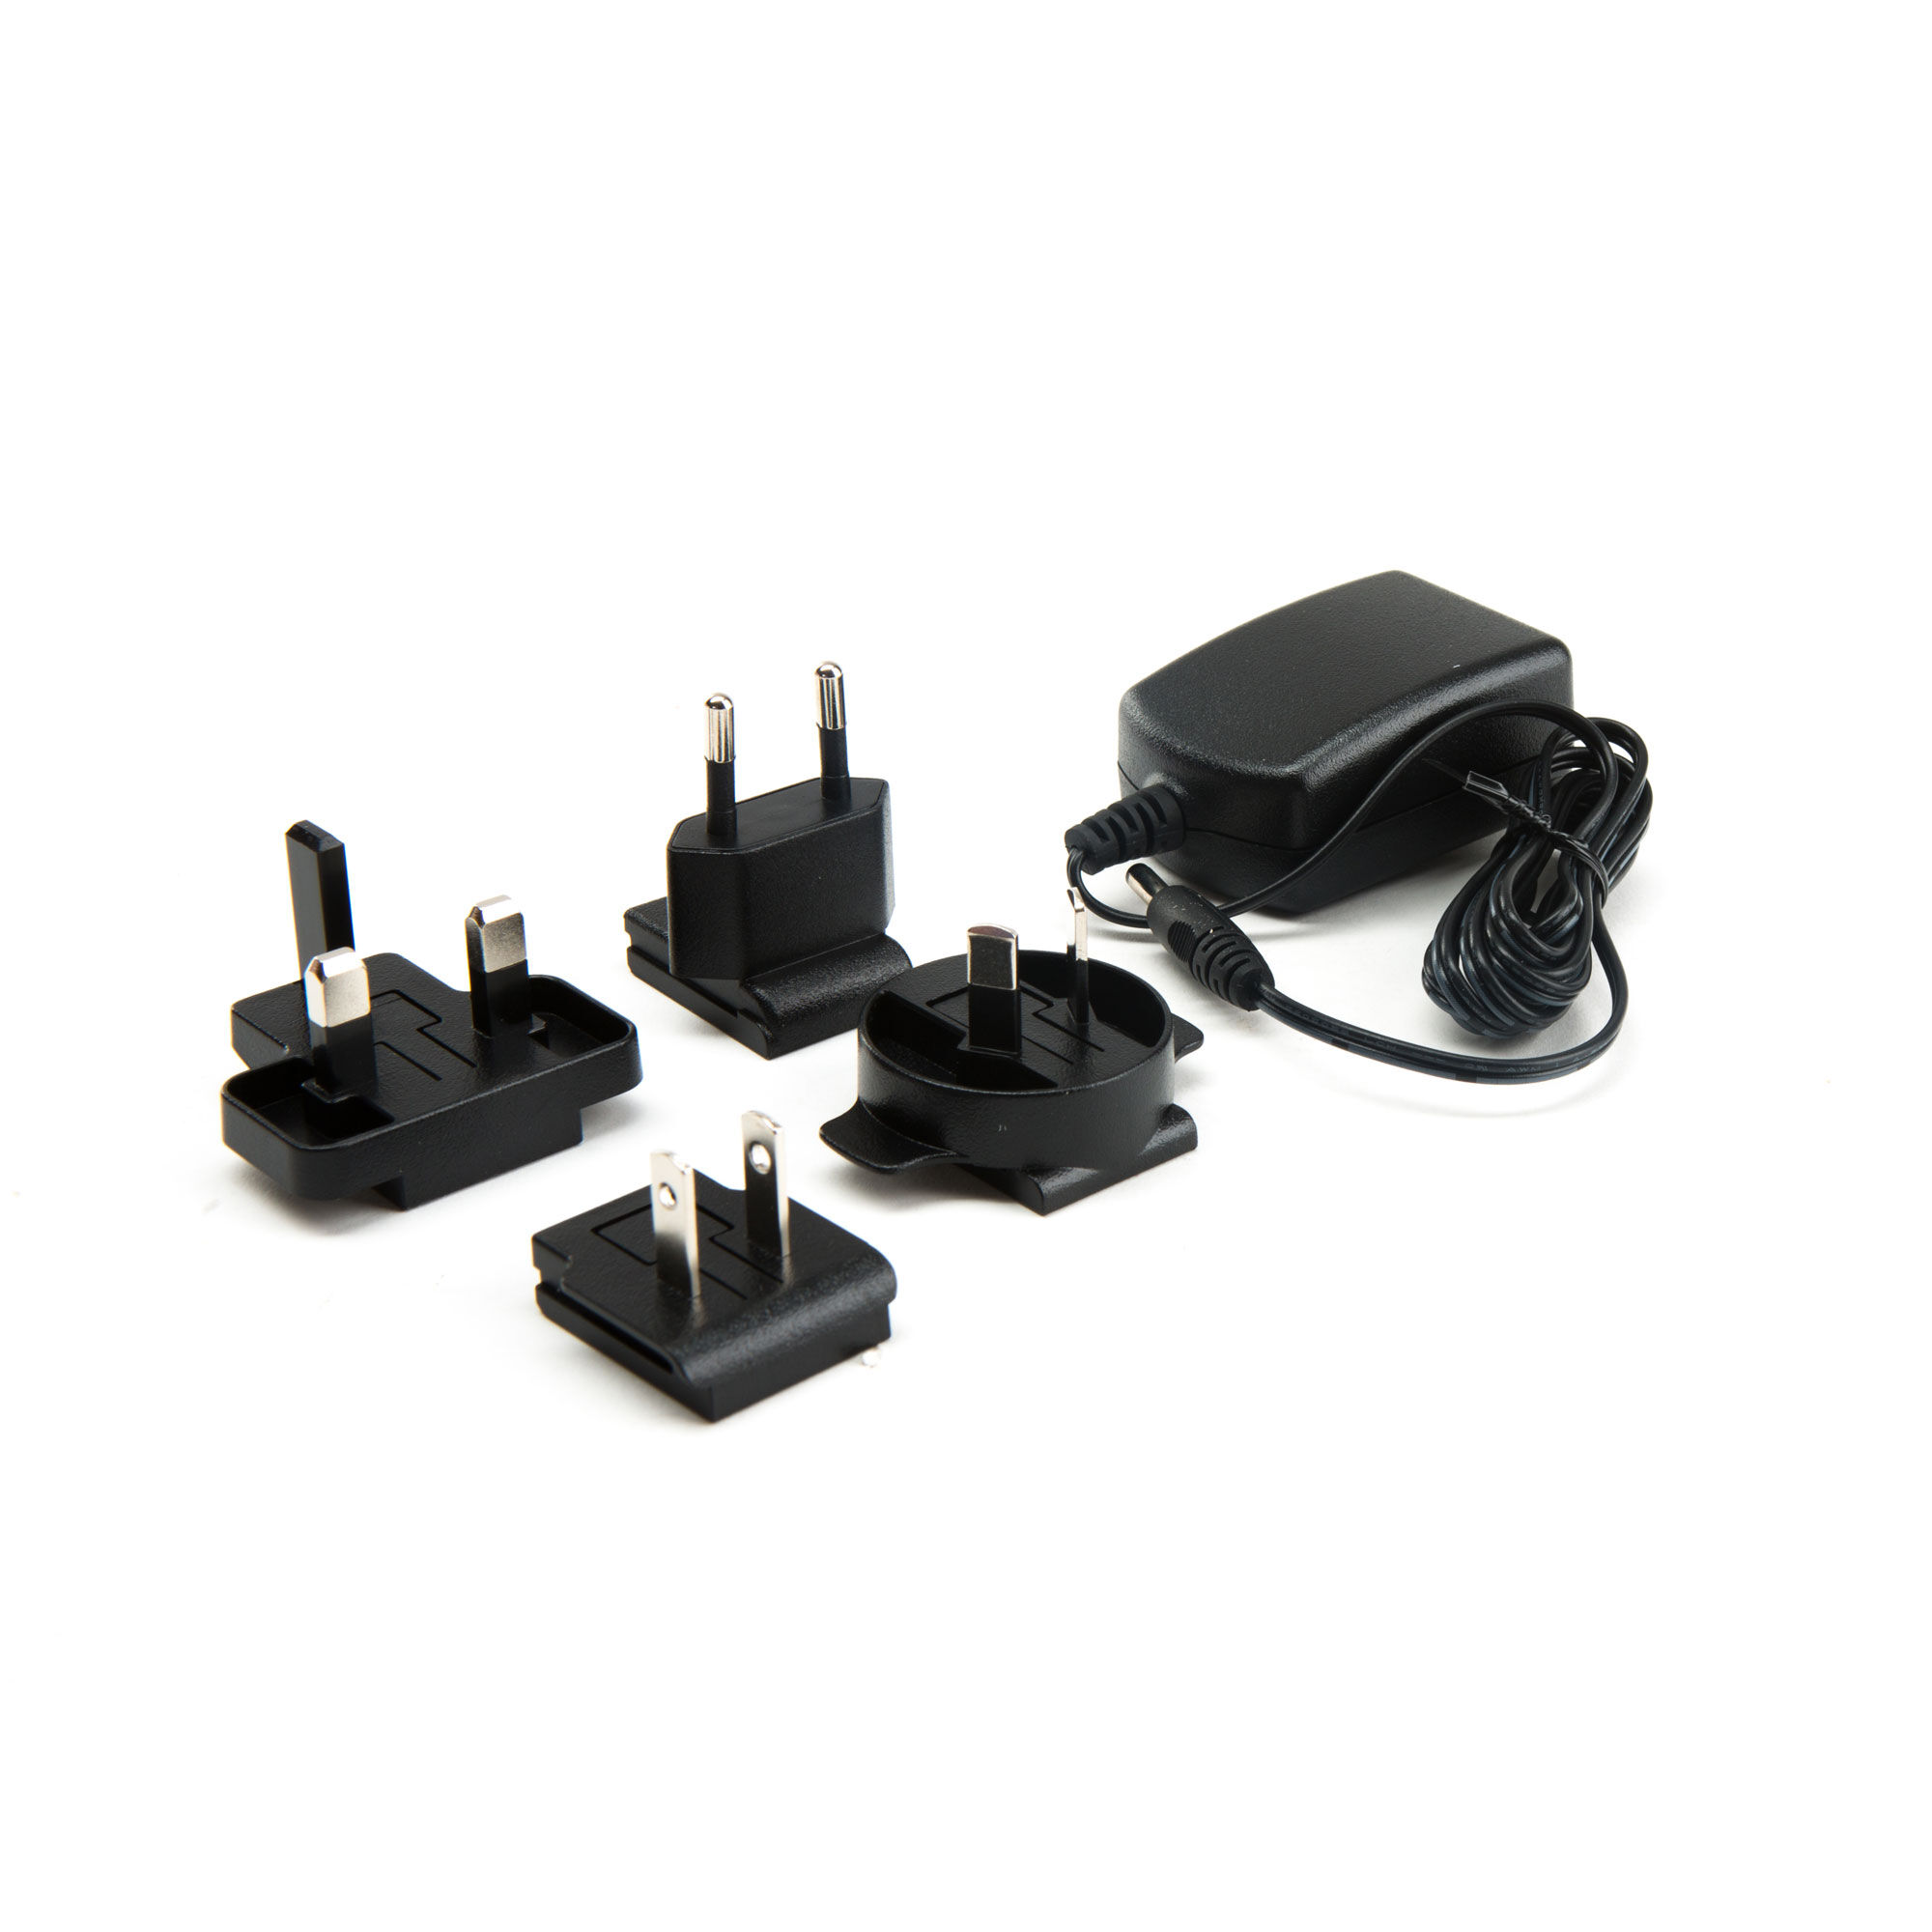 Radio Chargers | Tower Hobbies